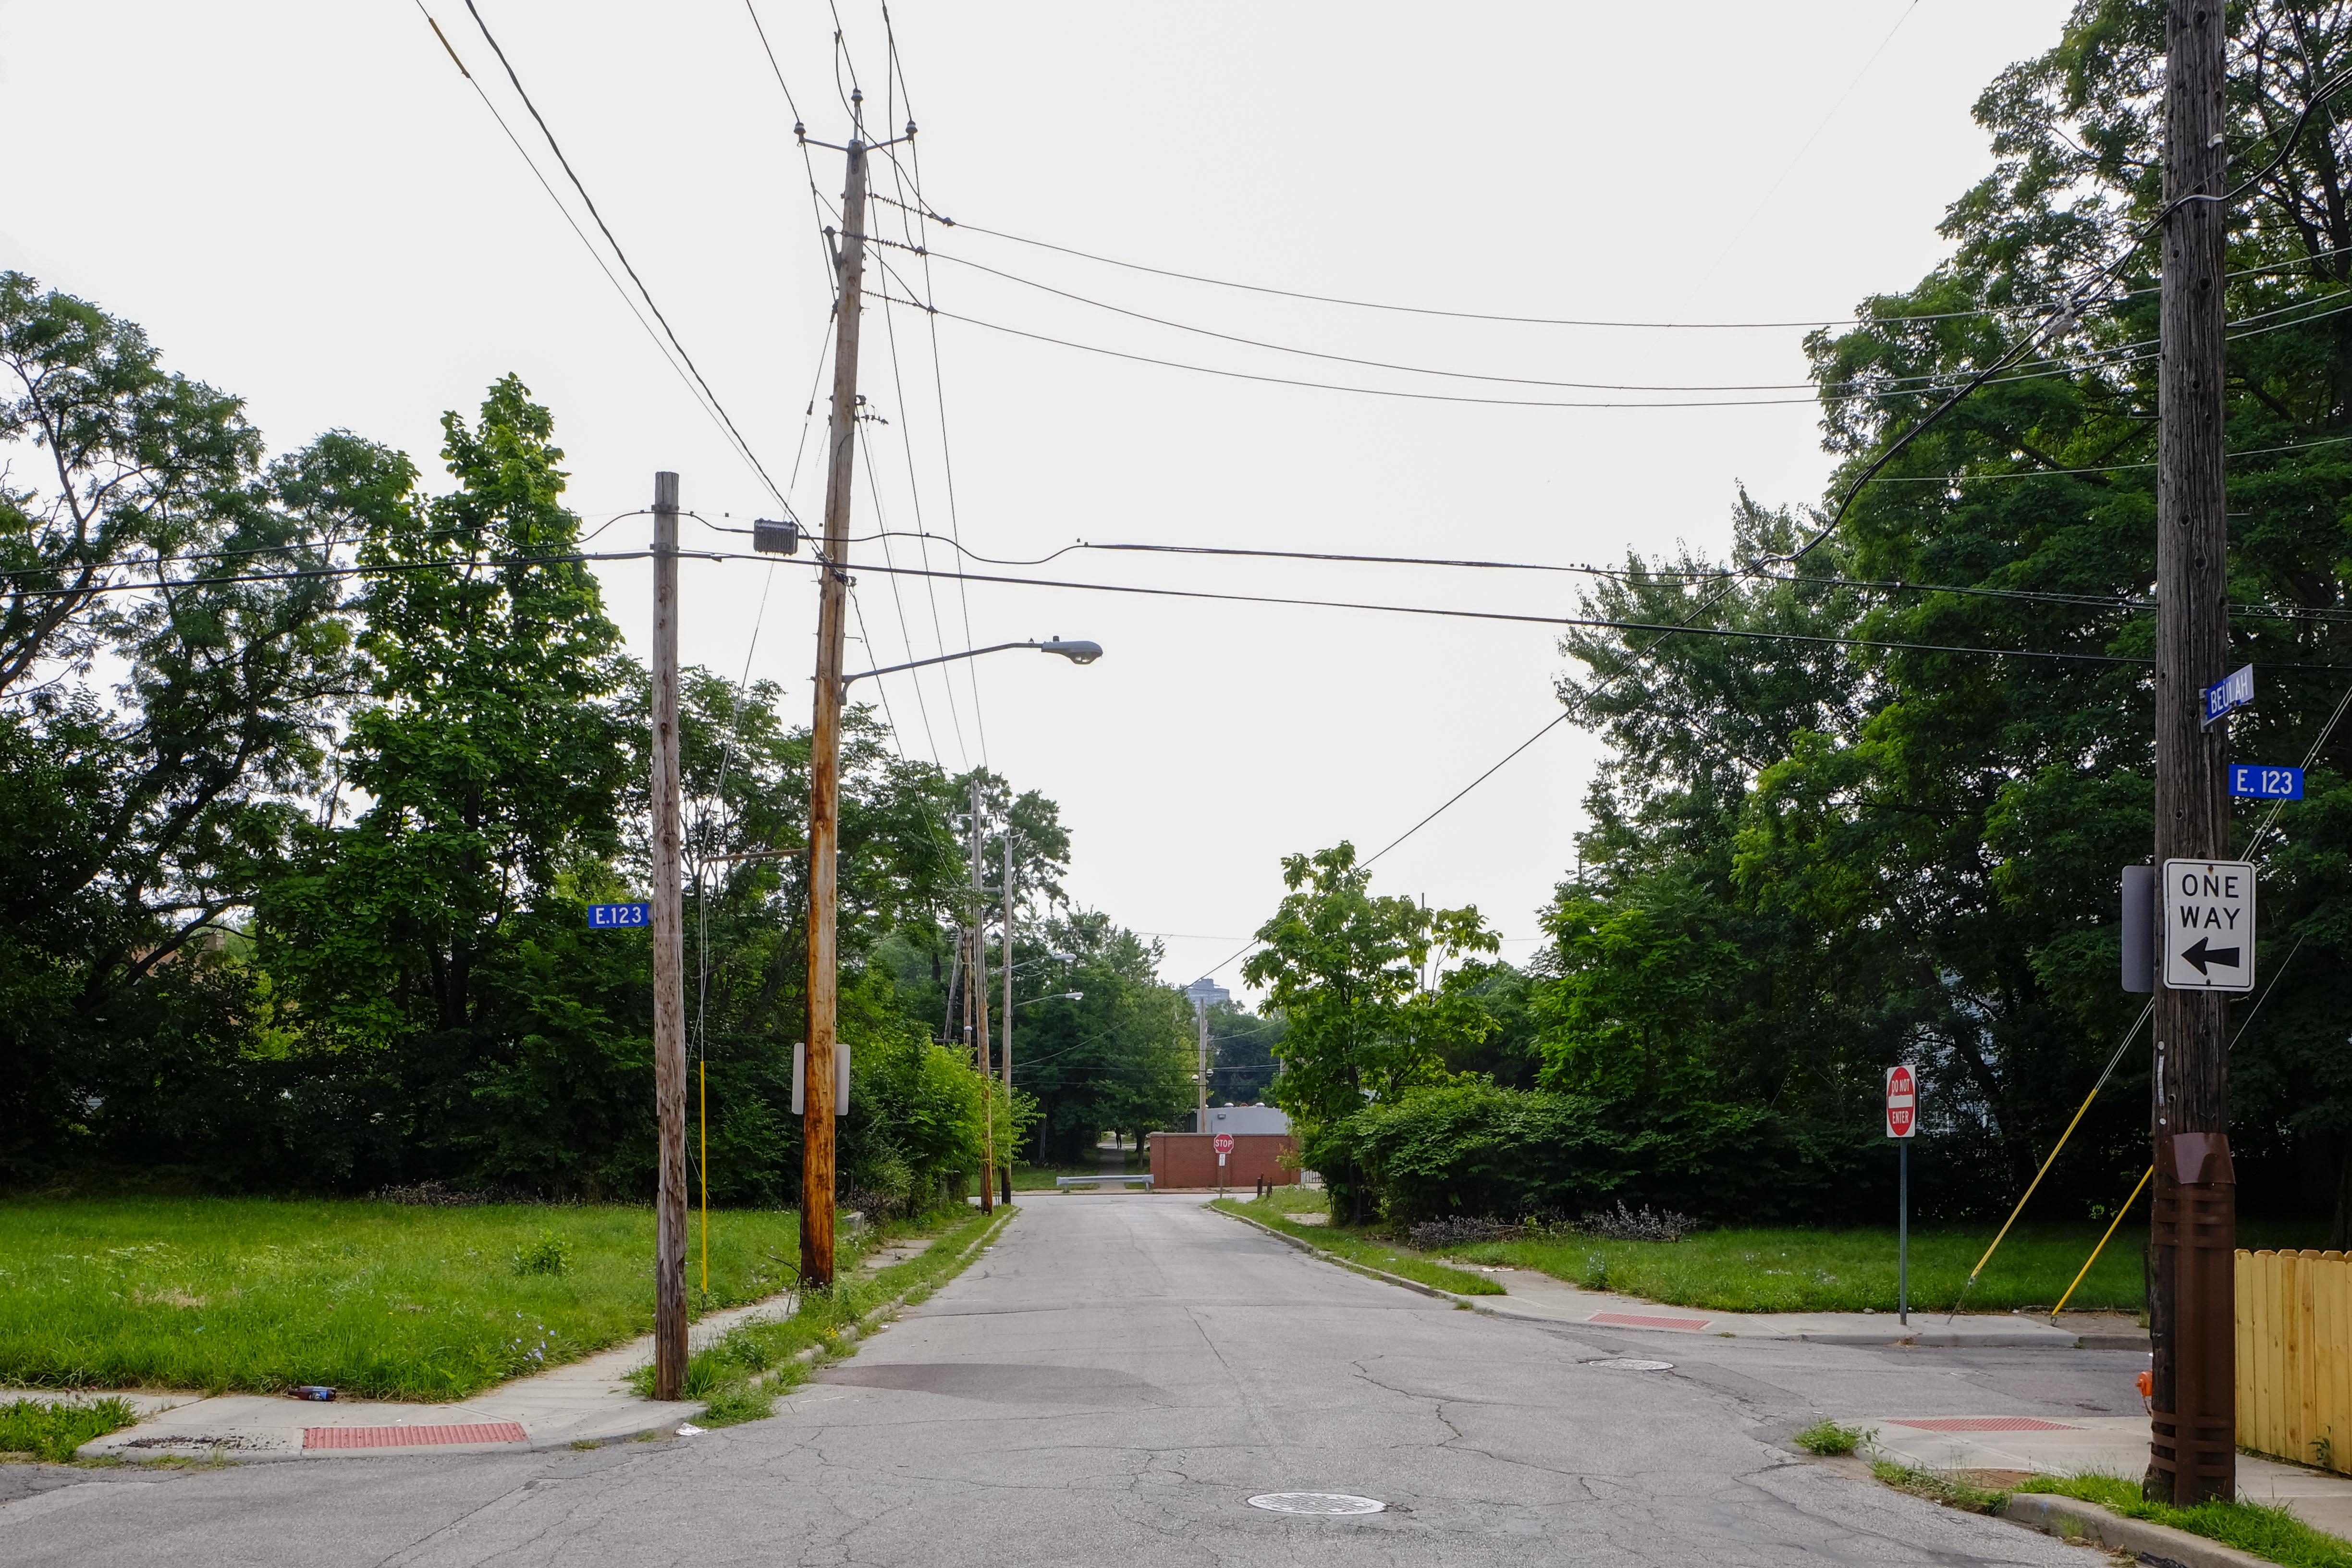 Site of the Glenville Shootout from the intersection of E. 123rd and Beulah looking east toward Lakeview Avenue, 2018. 